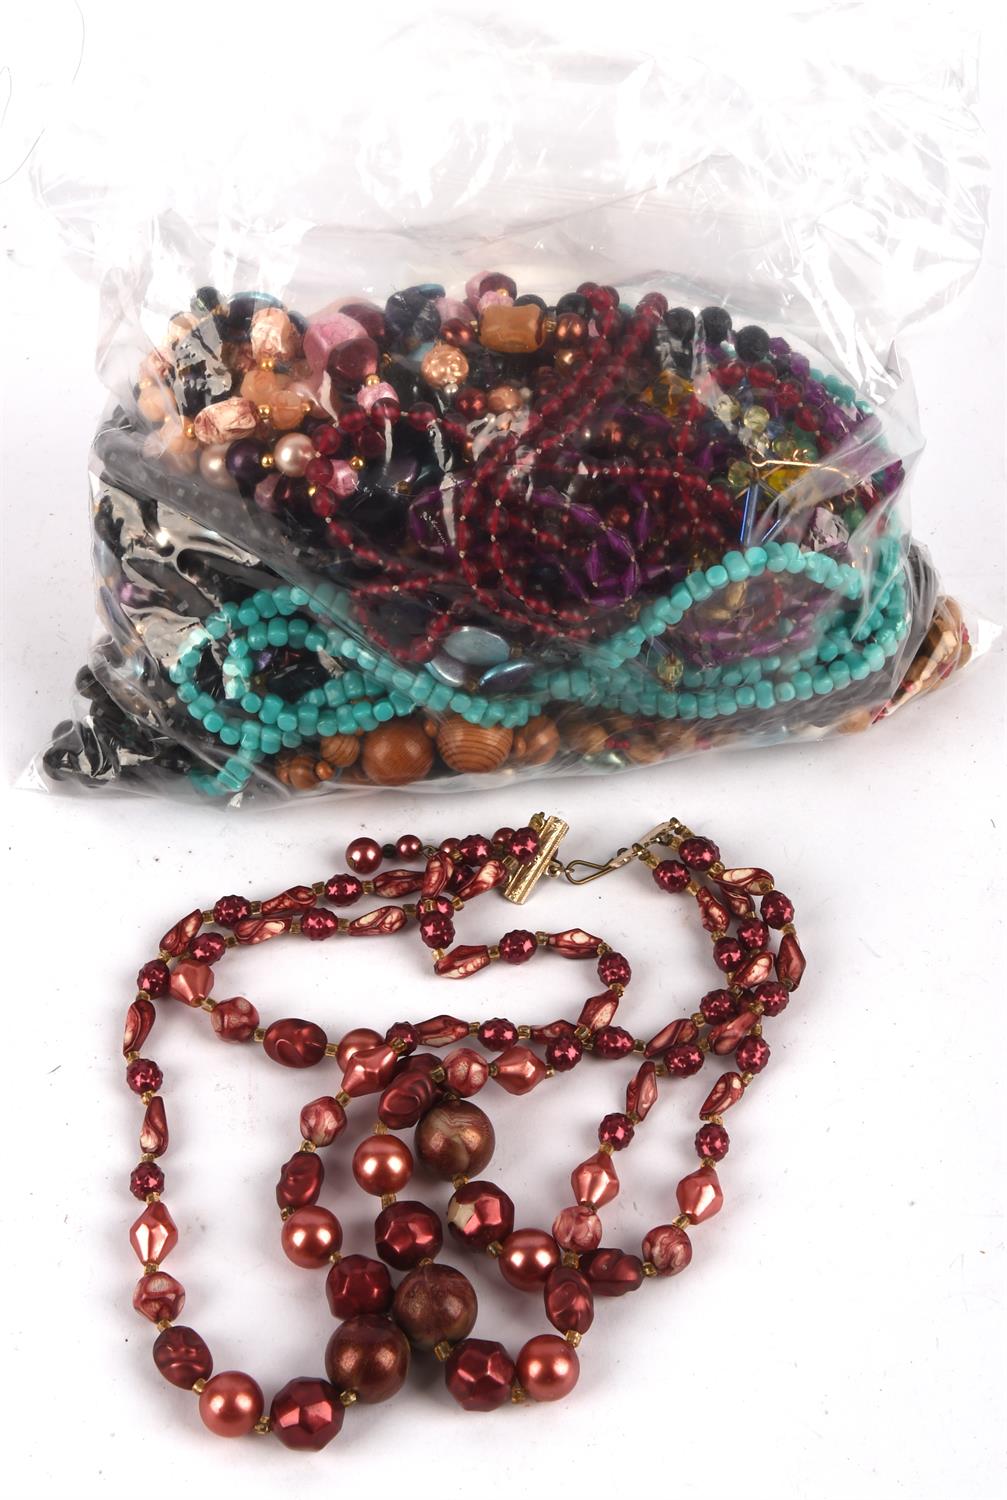 Selection of 1920's-1950's bead necklaces, including wooden beads, jet beads and others